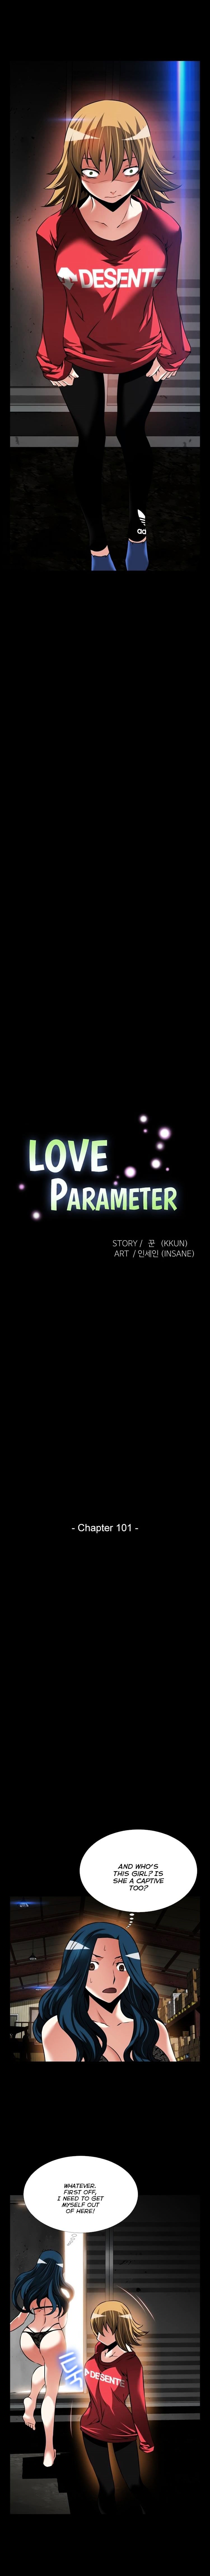 Love Parameter - Page 2